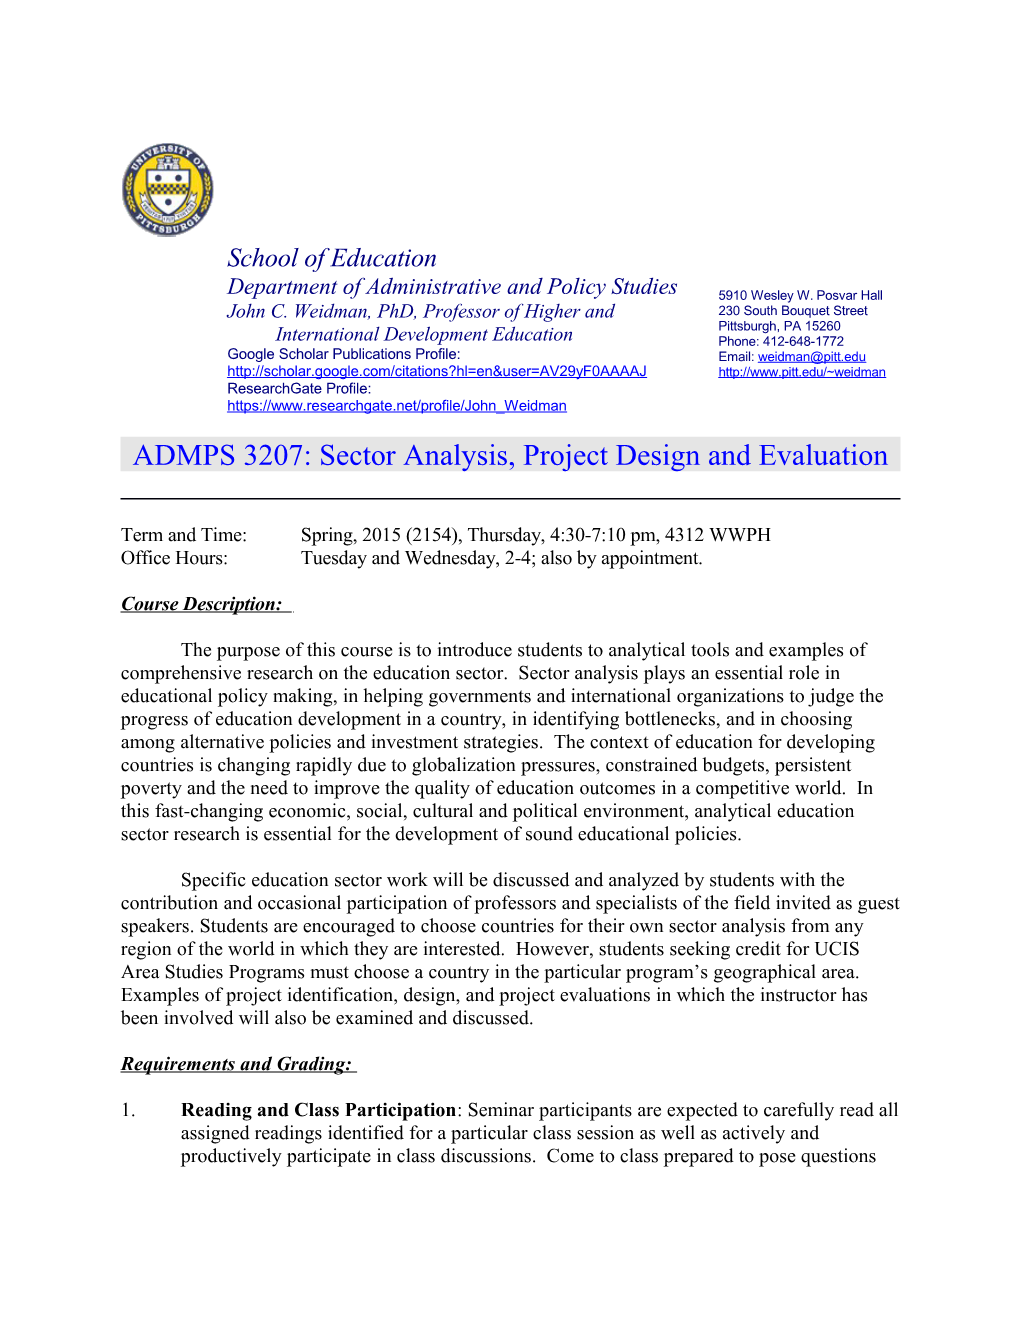 ADMPS 3207: Sector Analysis, Project Design and Evaluation